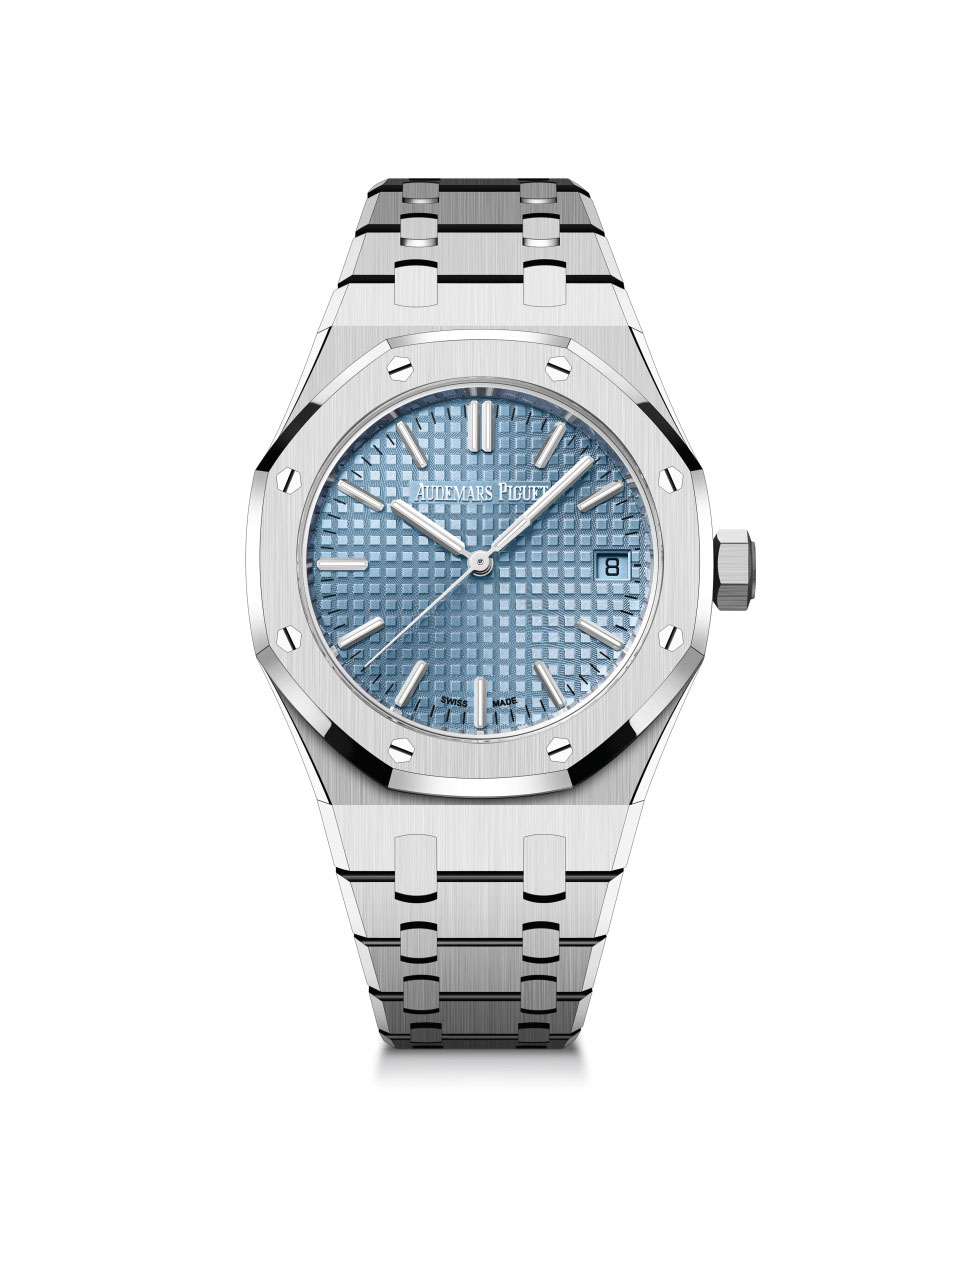 Royal Oak Selfwinding / 37mm; stainless steel case and bezel with light blue dial (15550ST.OO.1356ST.04)